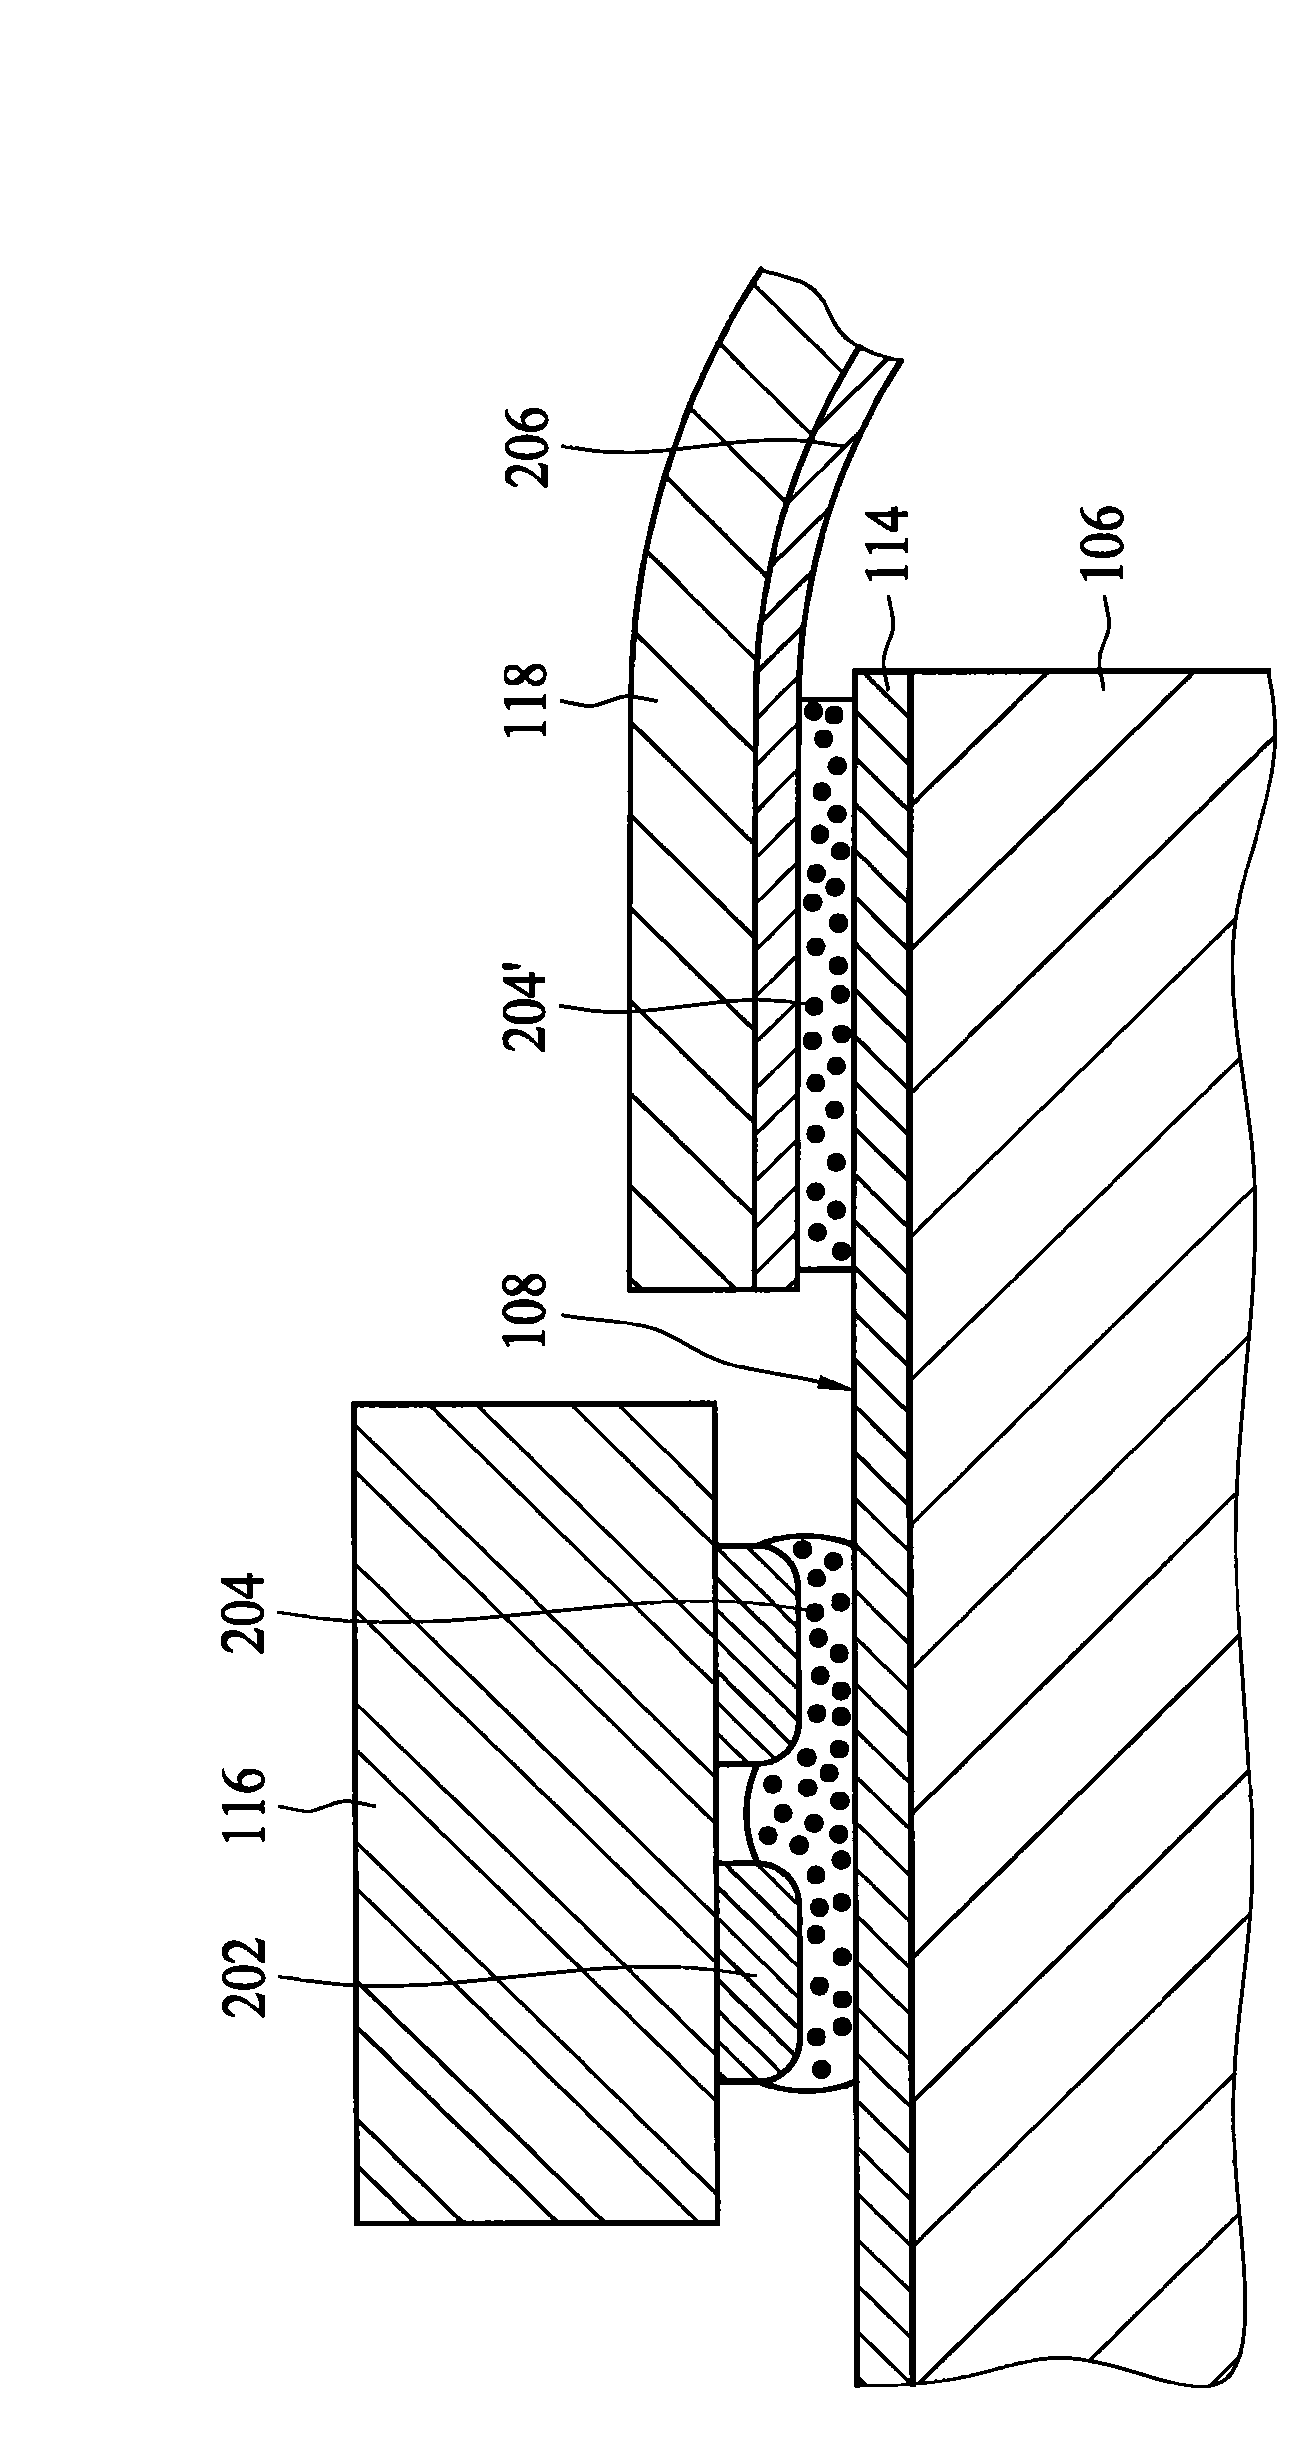 Display module provided with touch-control control device and touch-control display system thereof